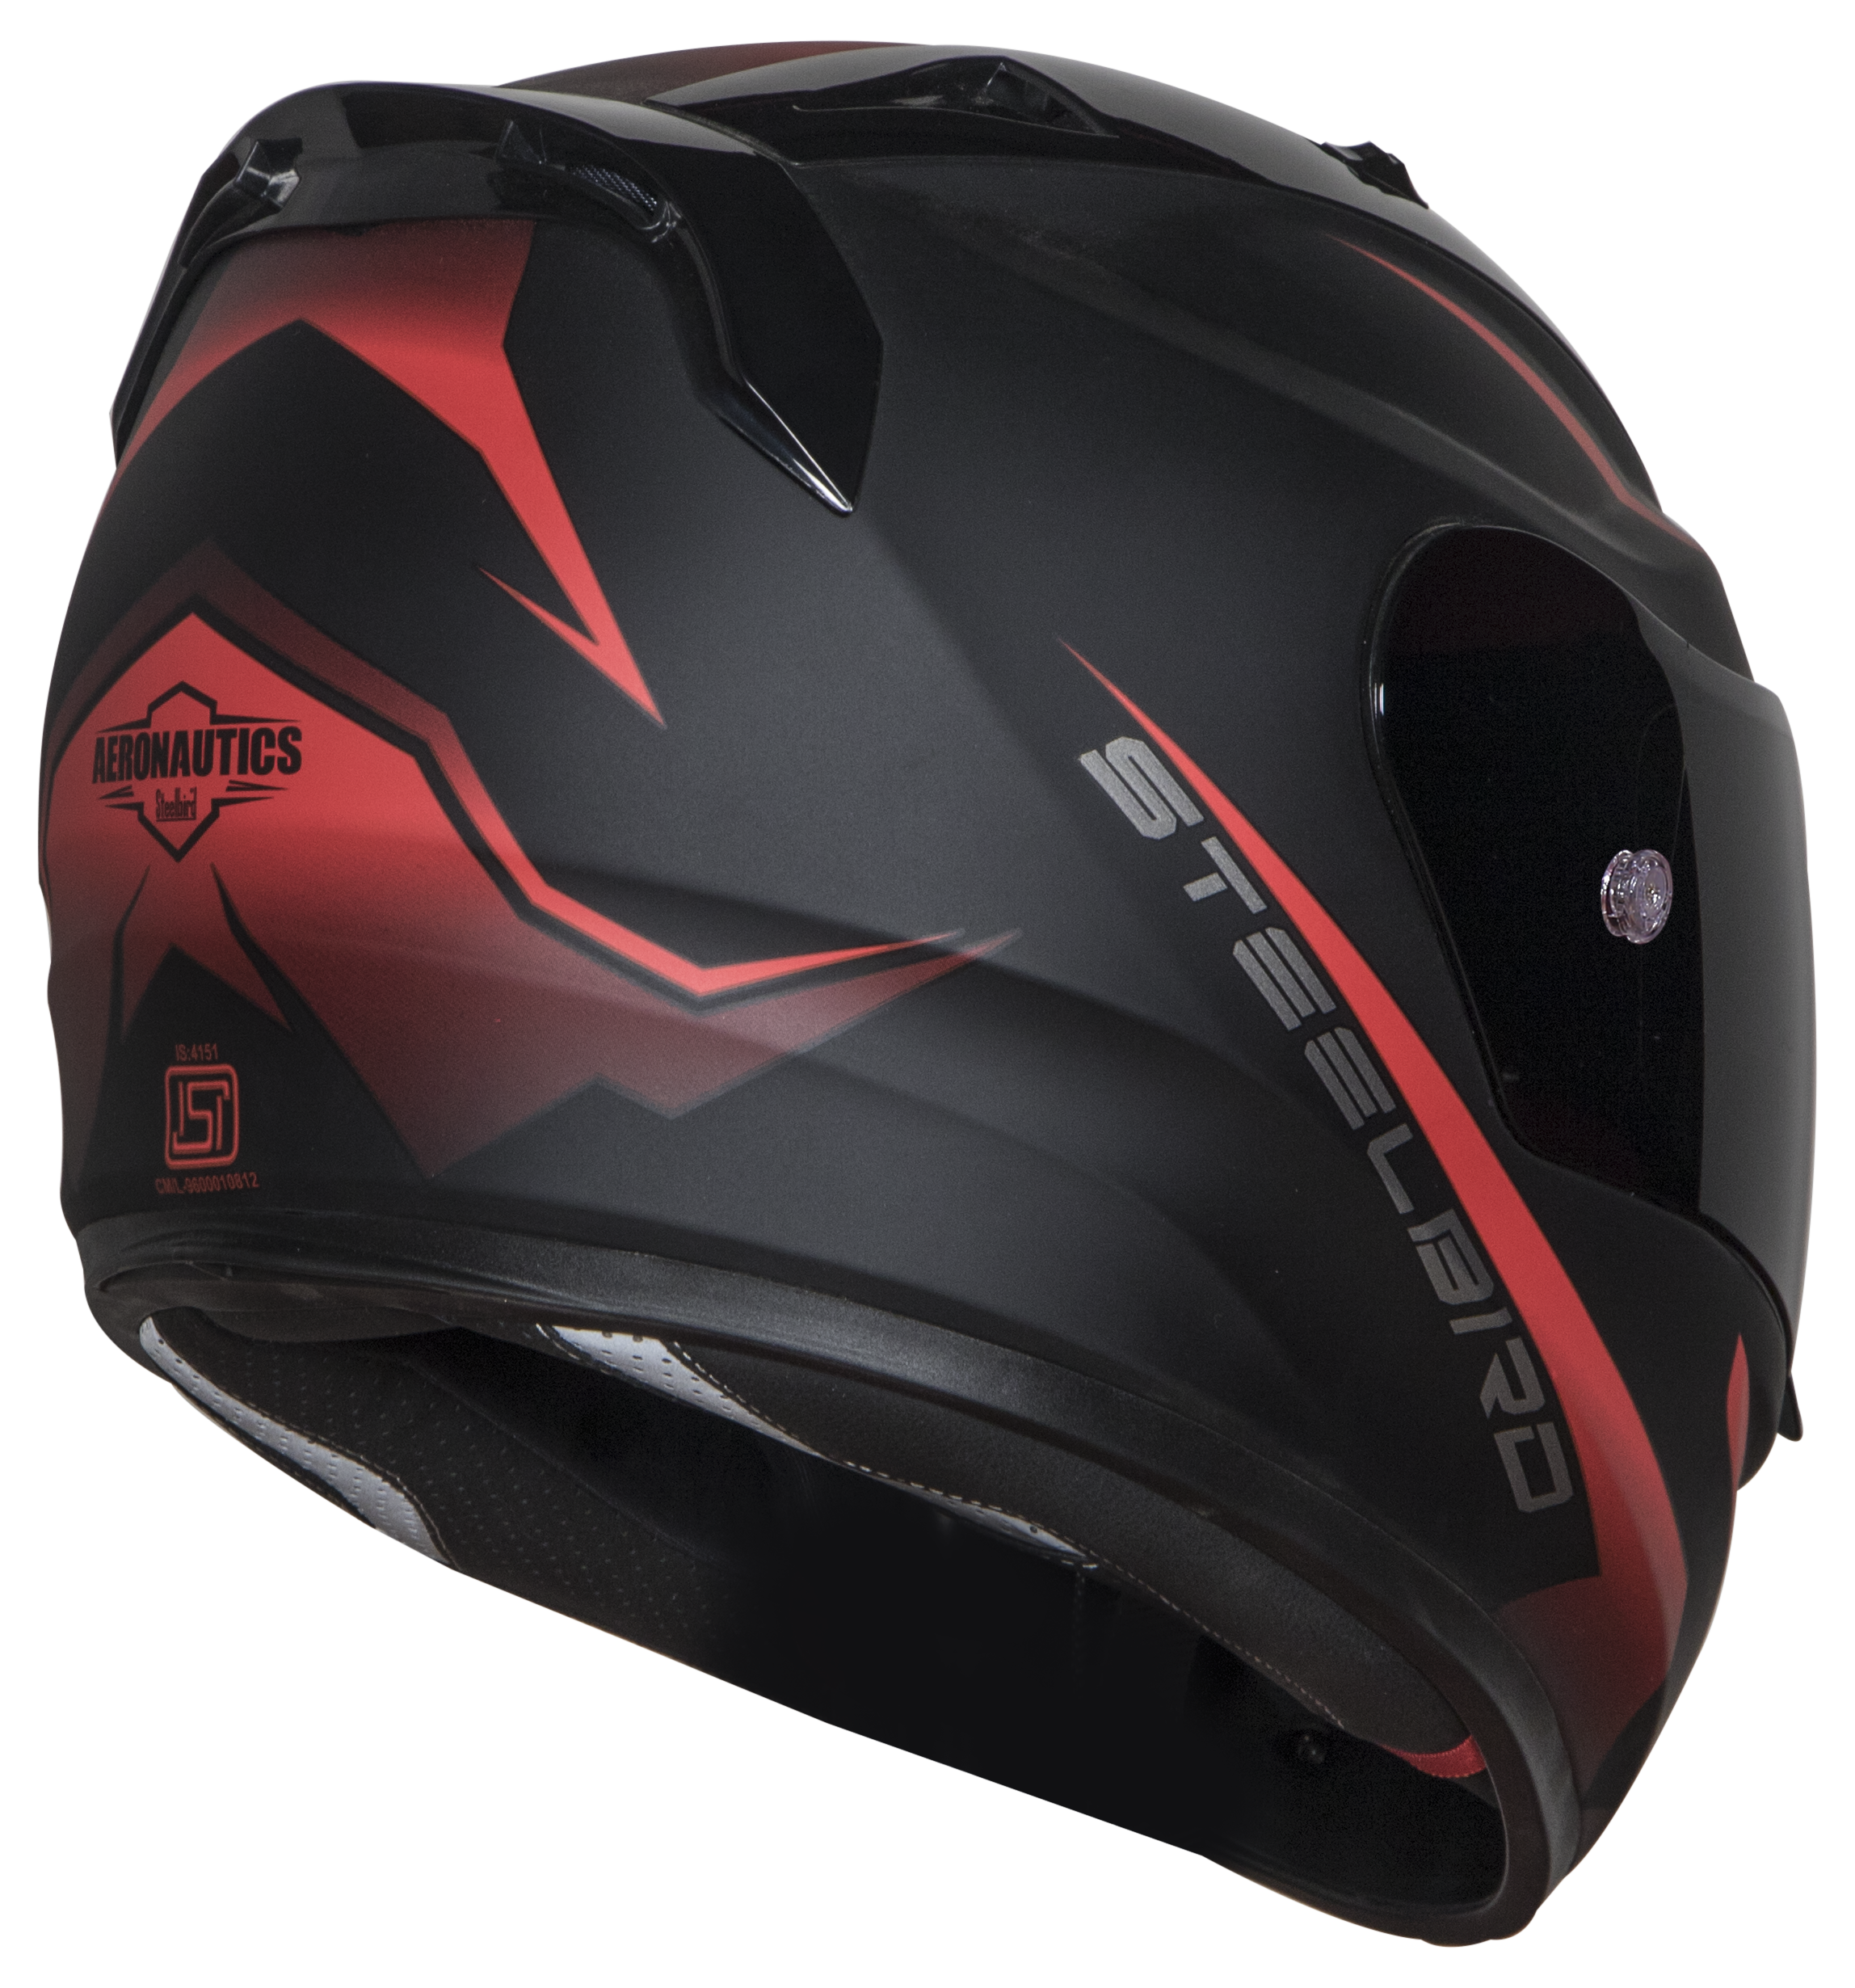 SA-1 WHIF Mat Black/Red (Fitted With Clear Visor Extra Anti-Fog Shield Chrome Rainbow Visor Free)